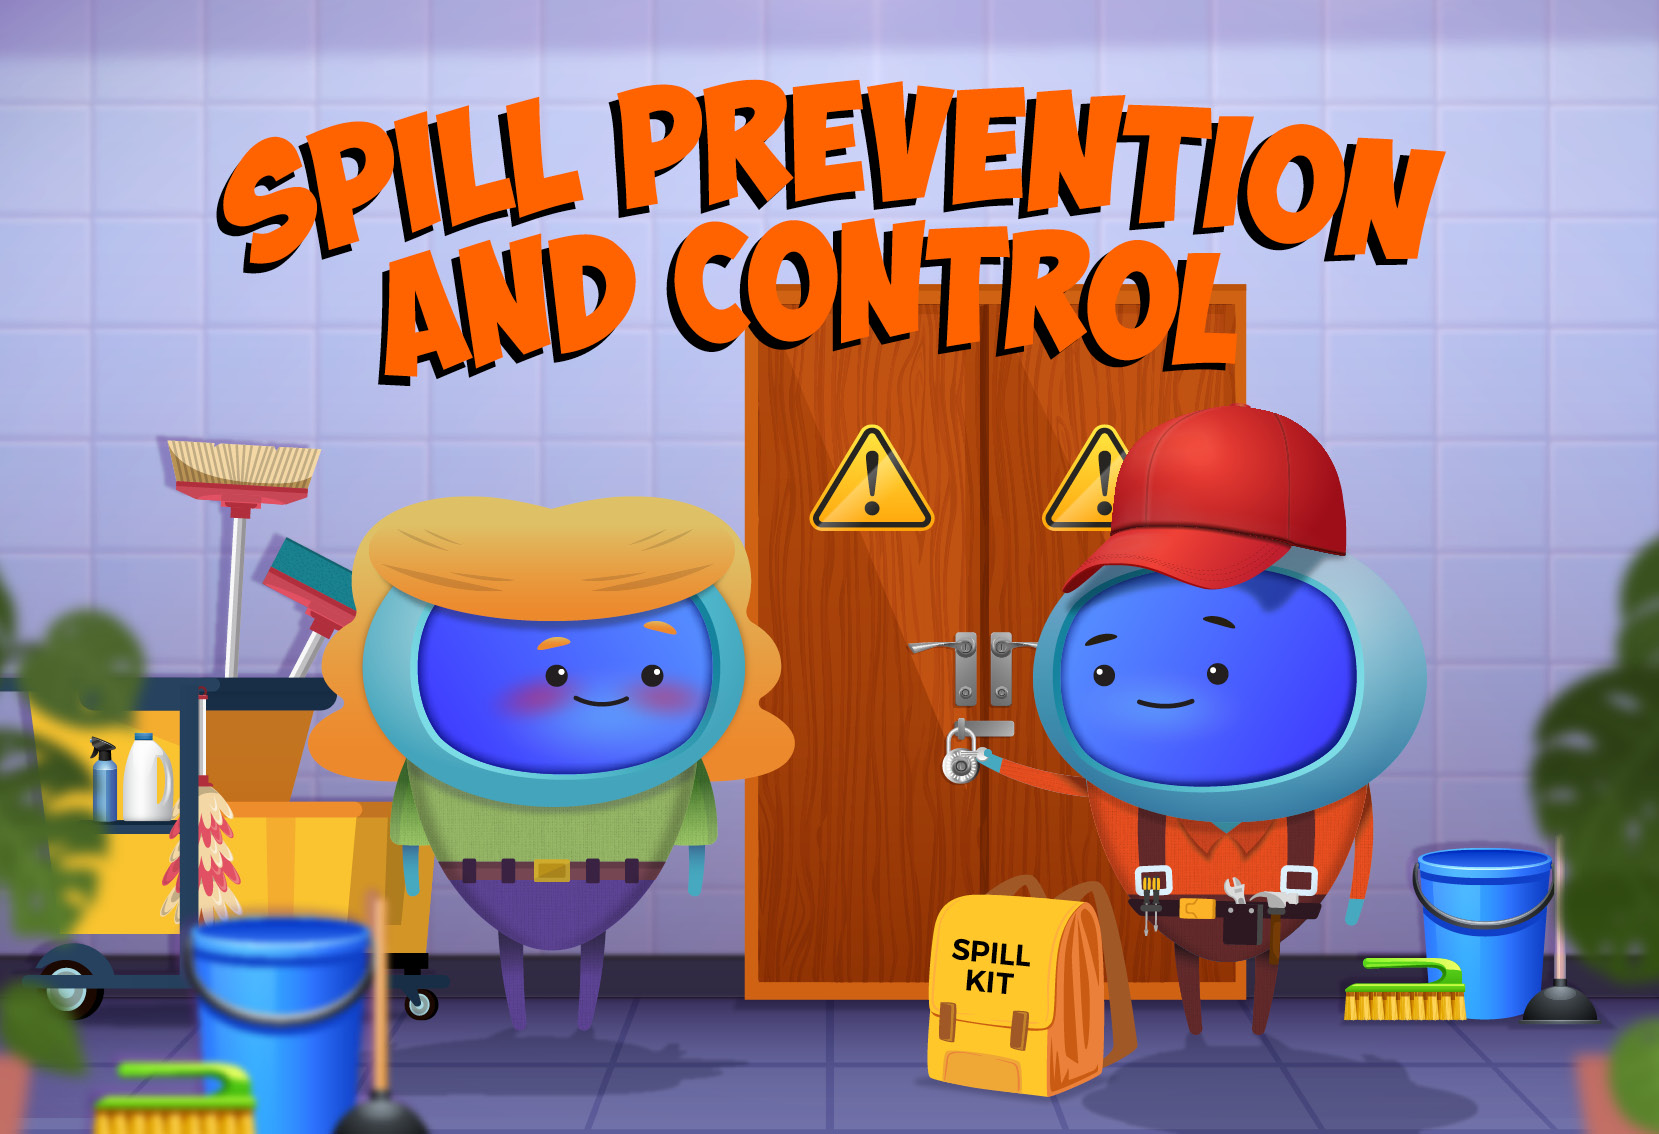 iAM 00119 - Spill Prevention and Control - LMS Thumbnails-1